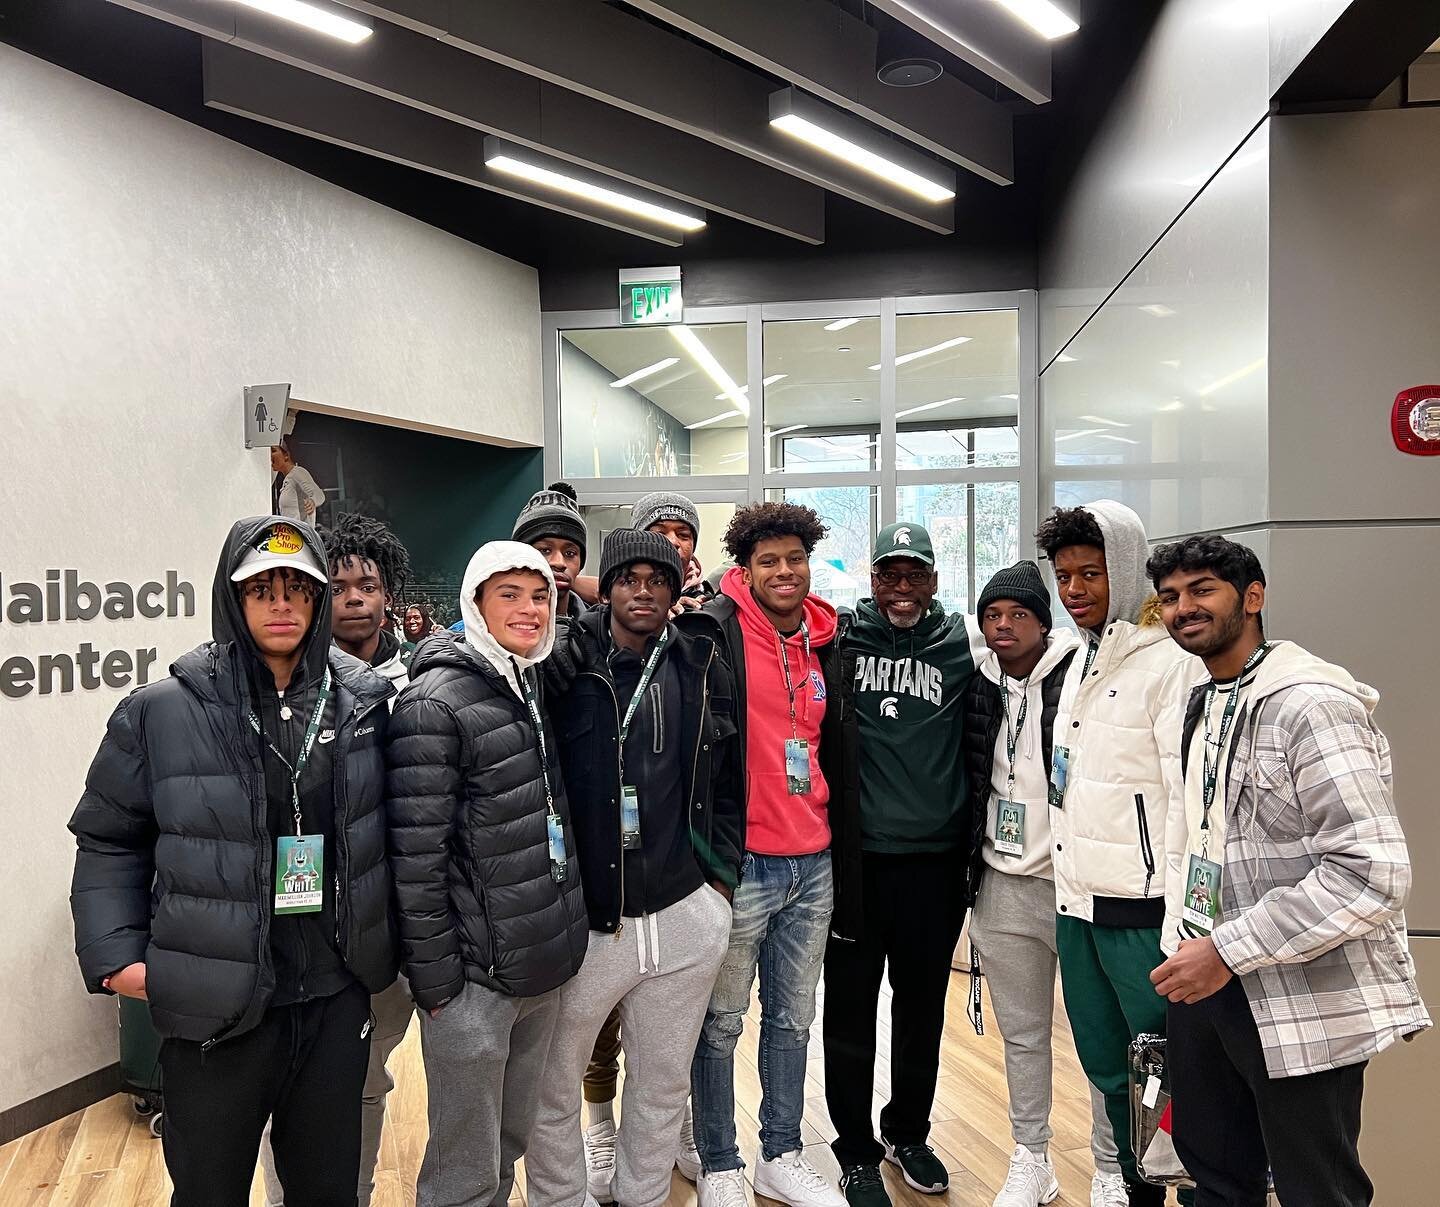 10 STUDENT athletes from Sycamore and Middletown were able to experience a unofficial recruiting visit to Michigan State University during the game on November 12th v Rutgers.  Coach Harlon Barnett gave the guys some words of wisdom and they were ver